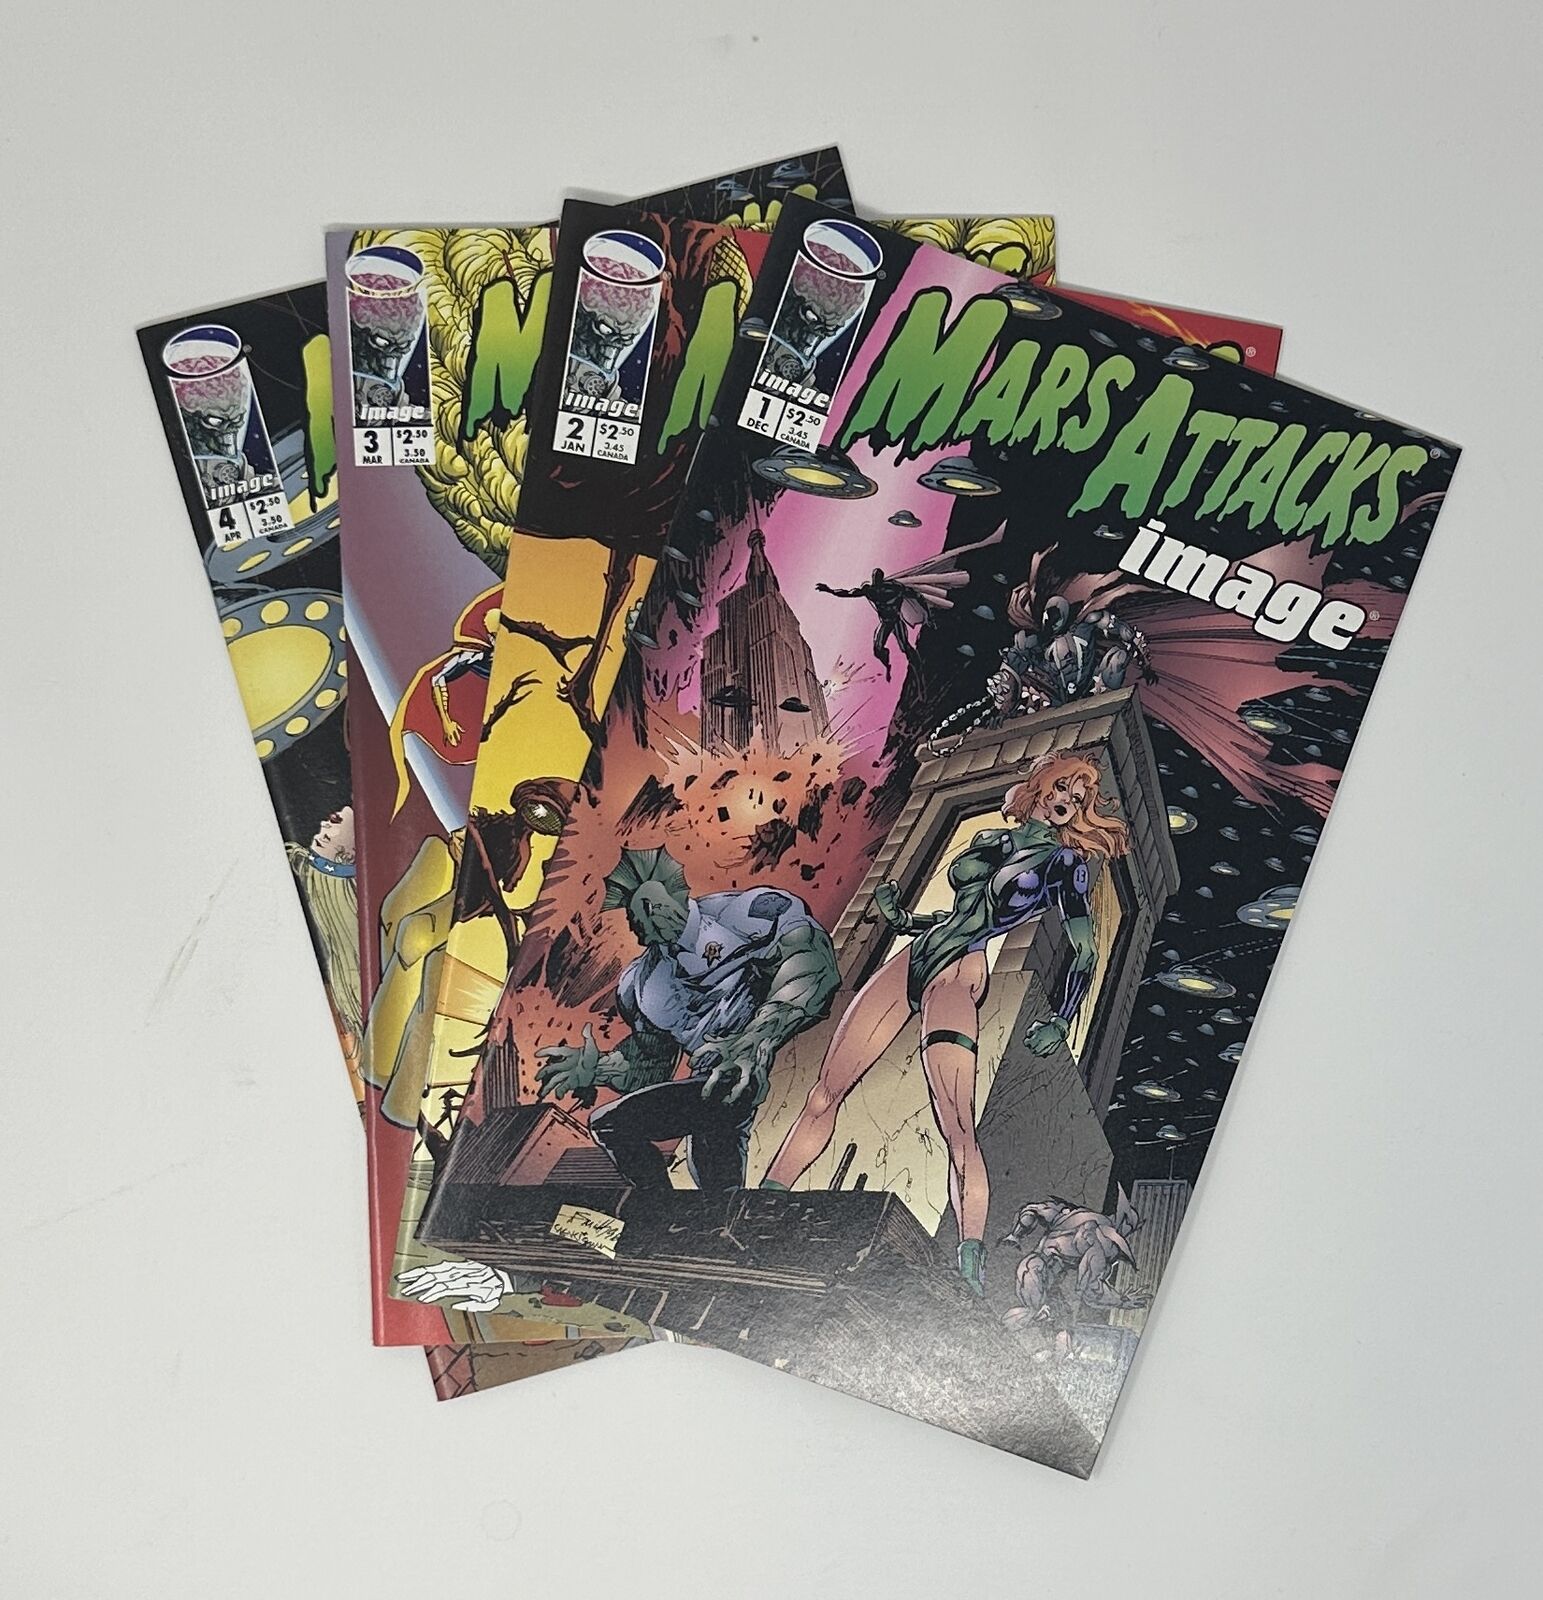 MARS ATTACKS IMAGE #1-4 | Complete Set | 1996-97 | Mars Attack the Image Heroes